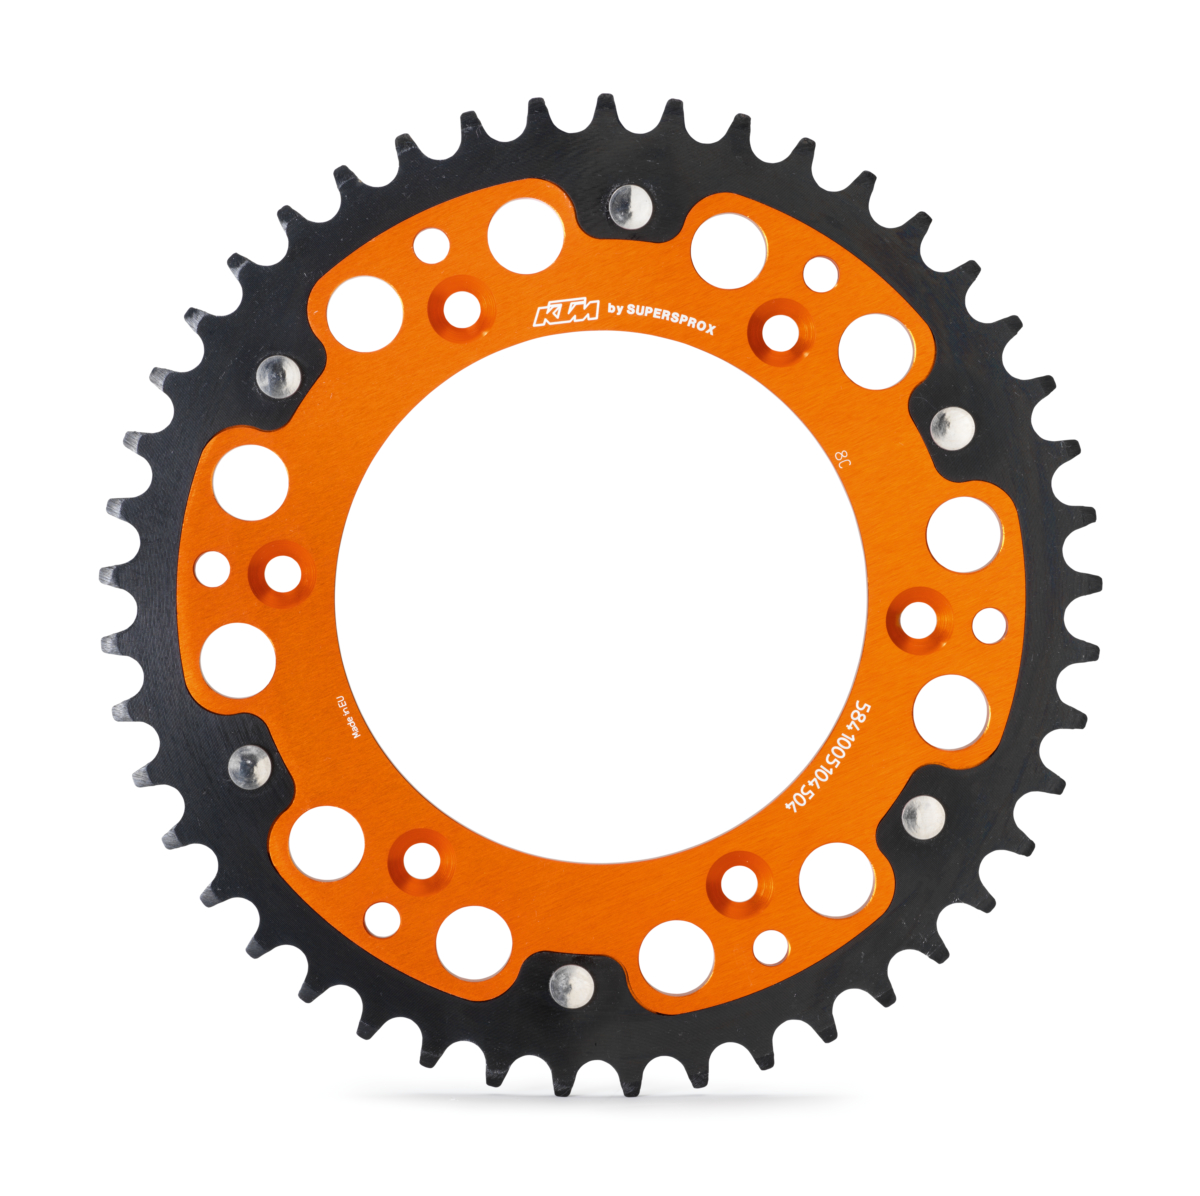 Details about   Supersprox Stealth Black Rear Sprocket 520 Pitch 50 Teeth KTM 250 SX-F E 2014 